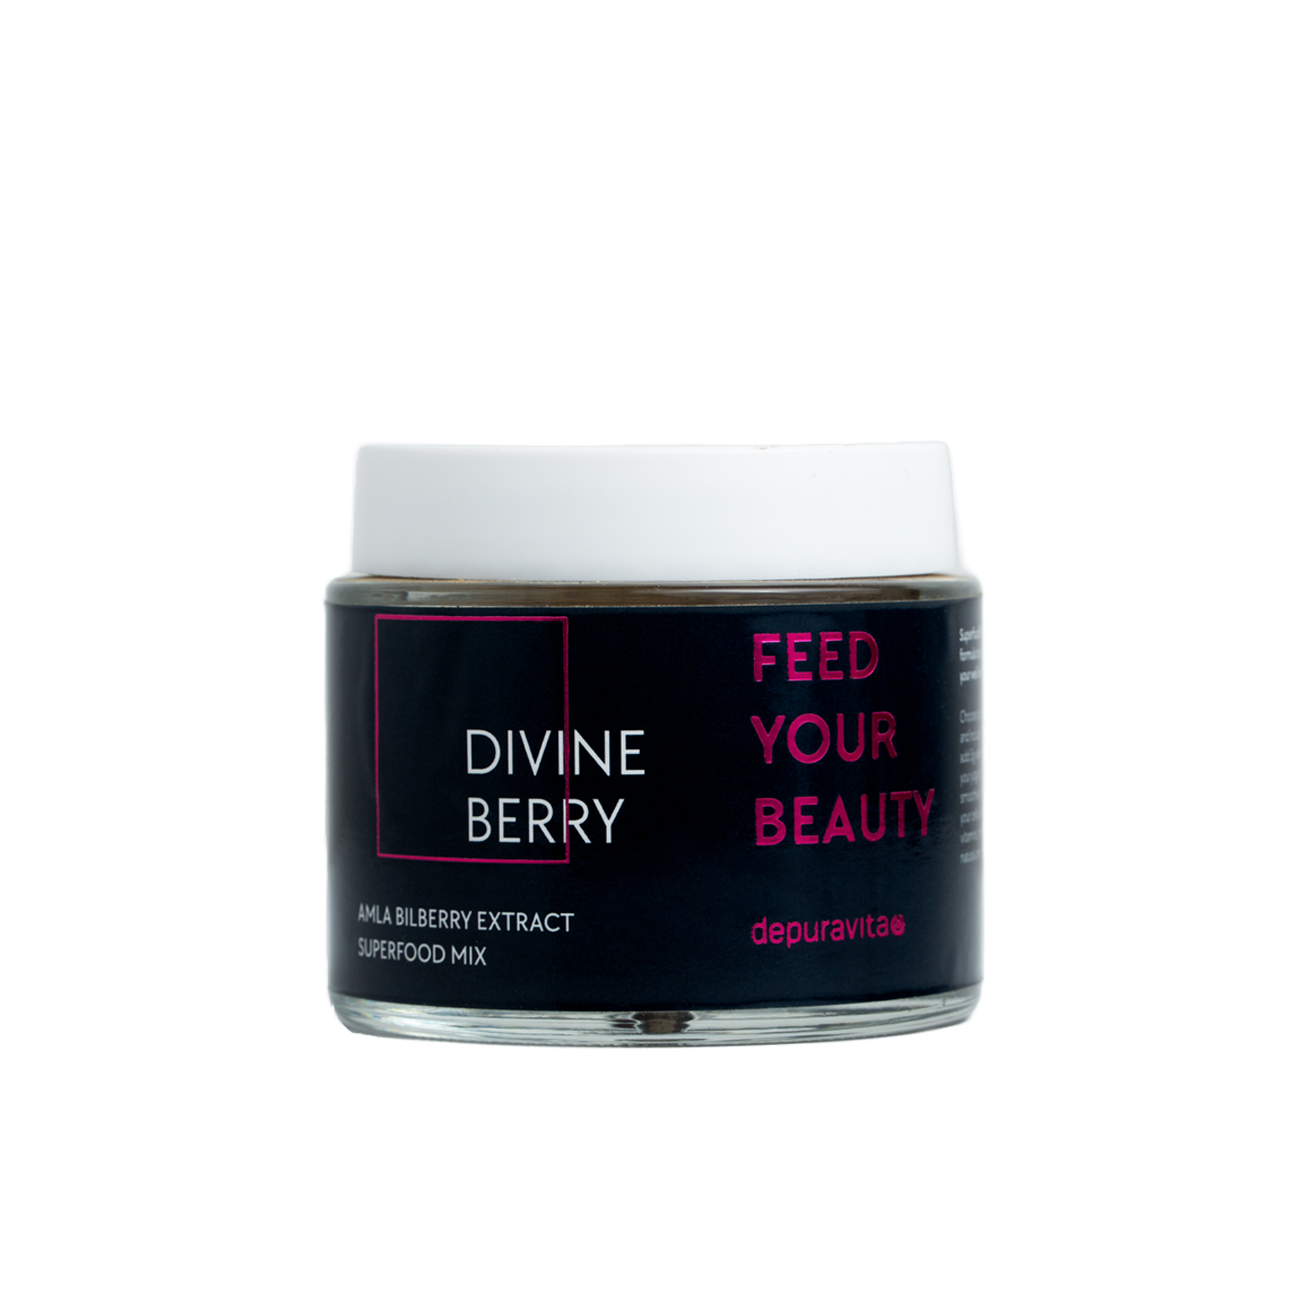 The Divine Berry